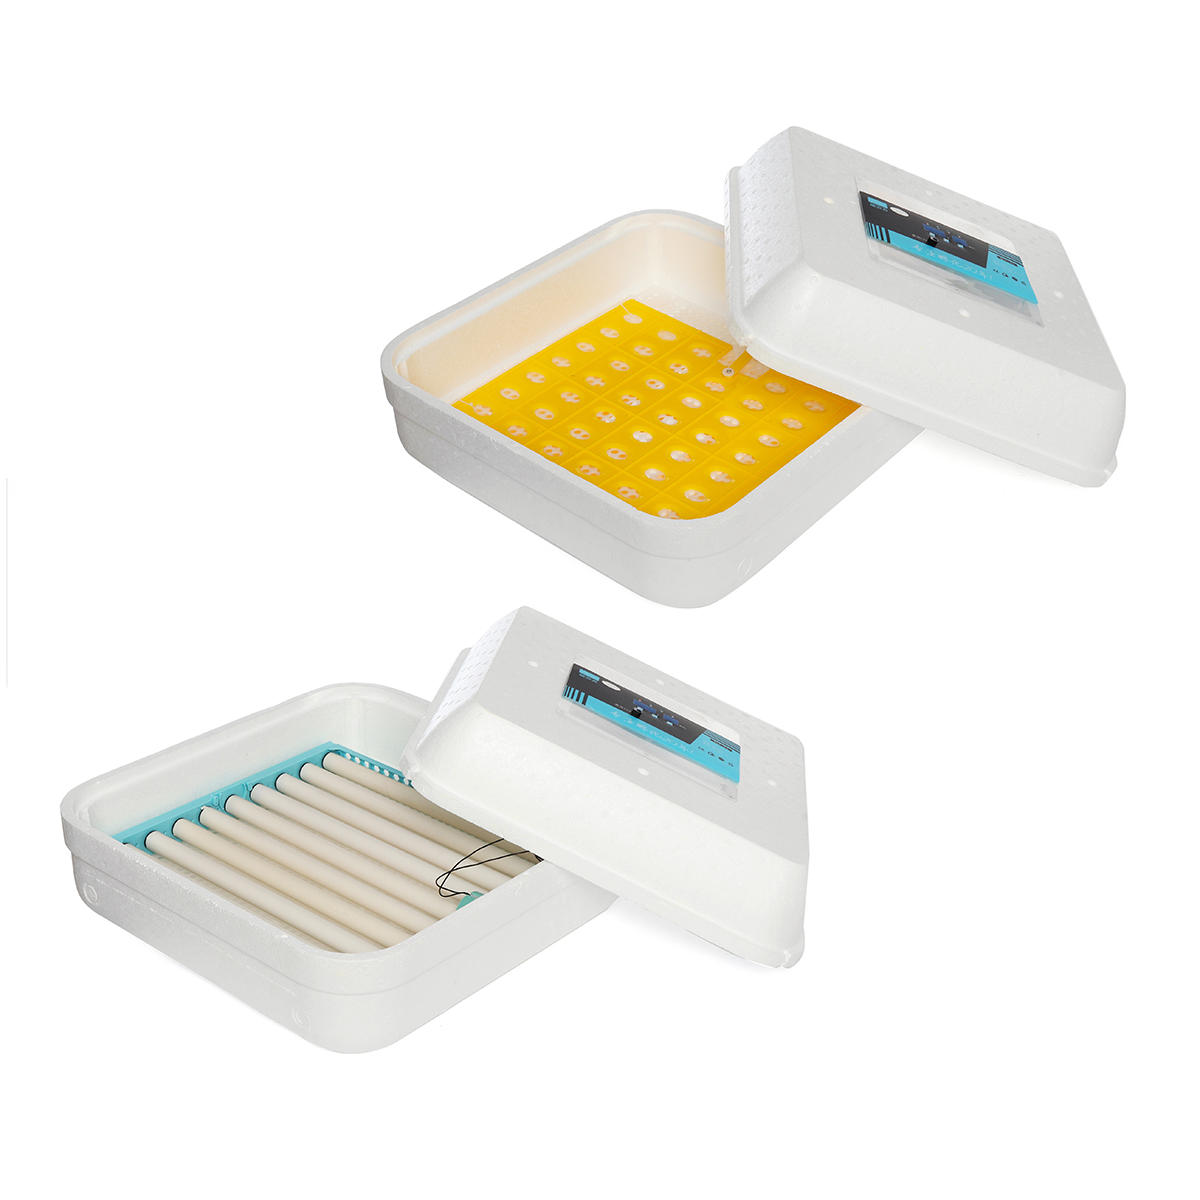 220V 55/64 Pieces Automatic Digital Egg Hatcher LCD Dislplay Incubator Hatching Eggs Temperature Control for Chicken Duc